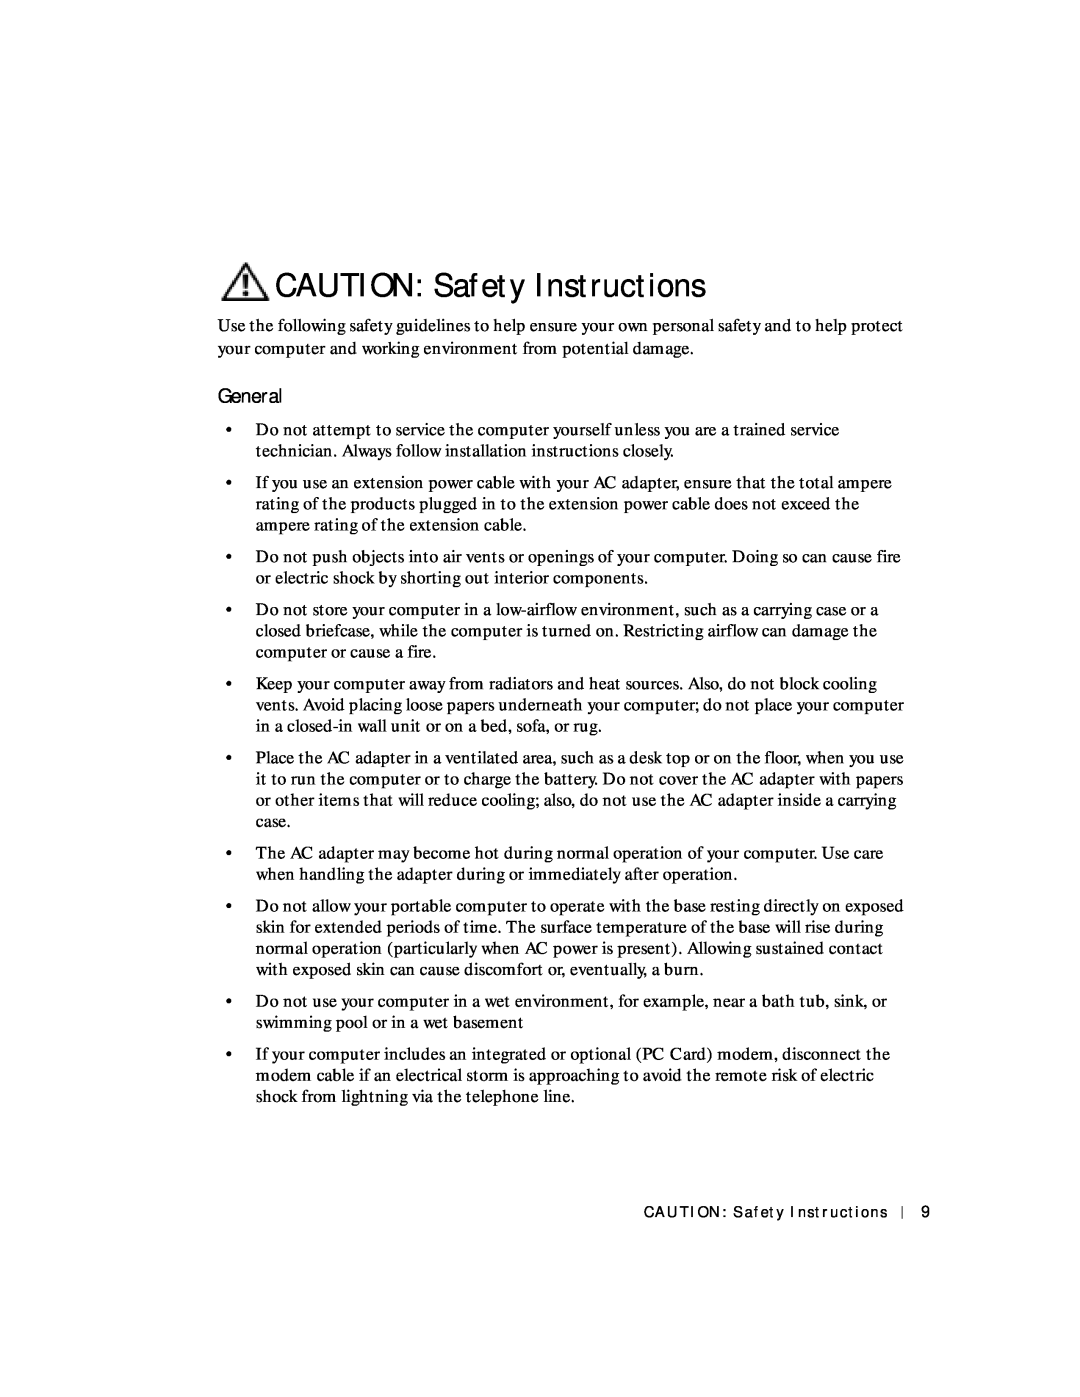 Dell 4150 owner manual CAUTION Safety Instructions, General 